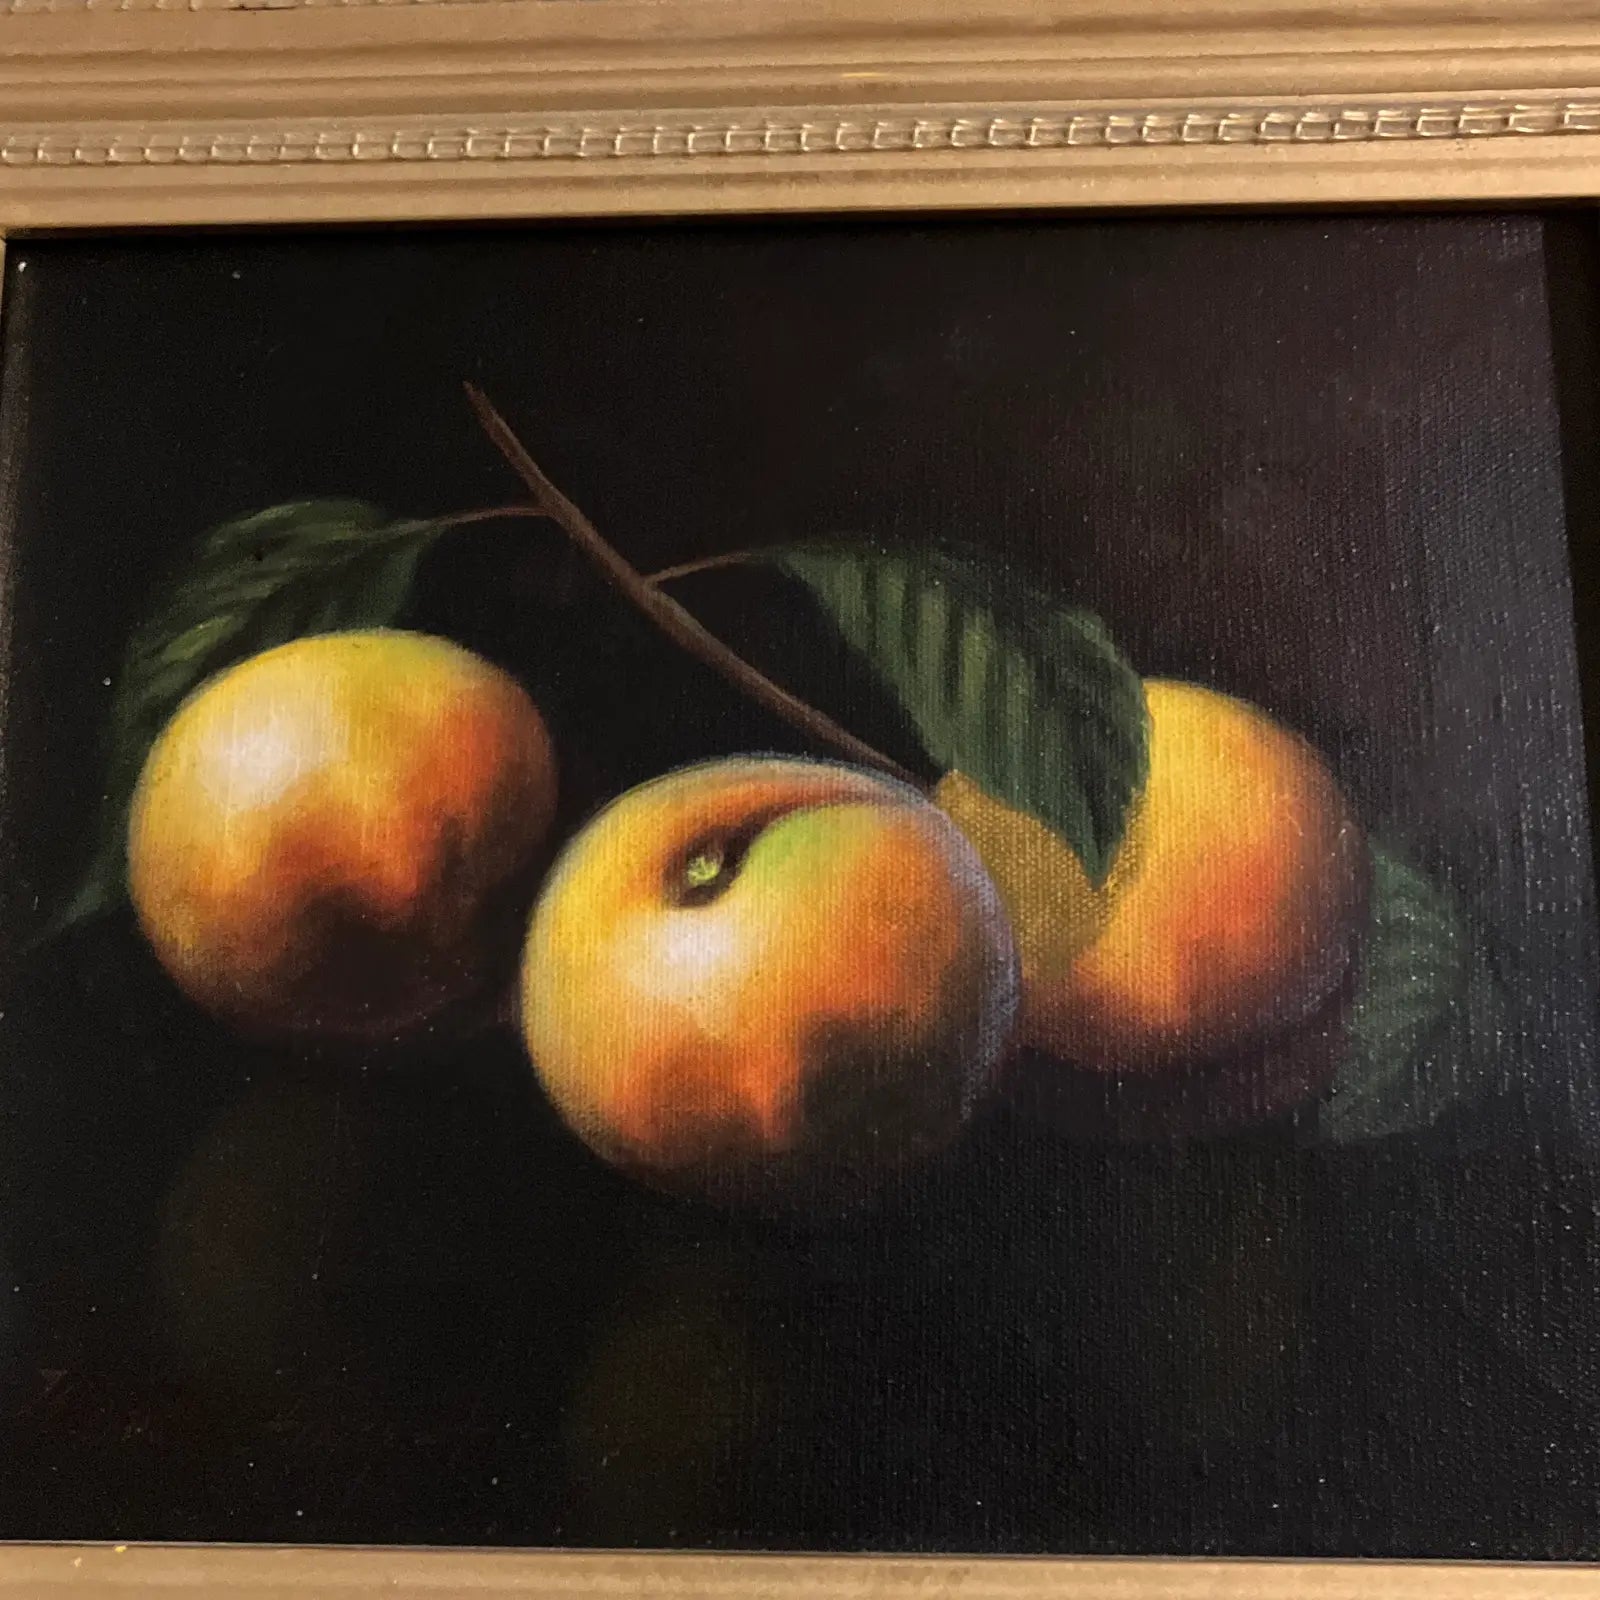 Vintage Still Life Painting with Peaches